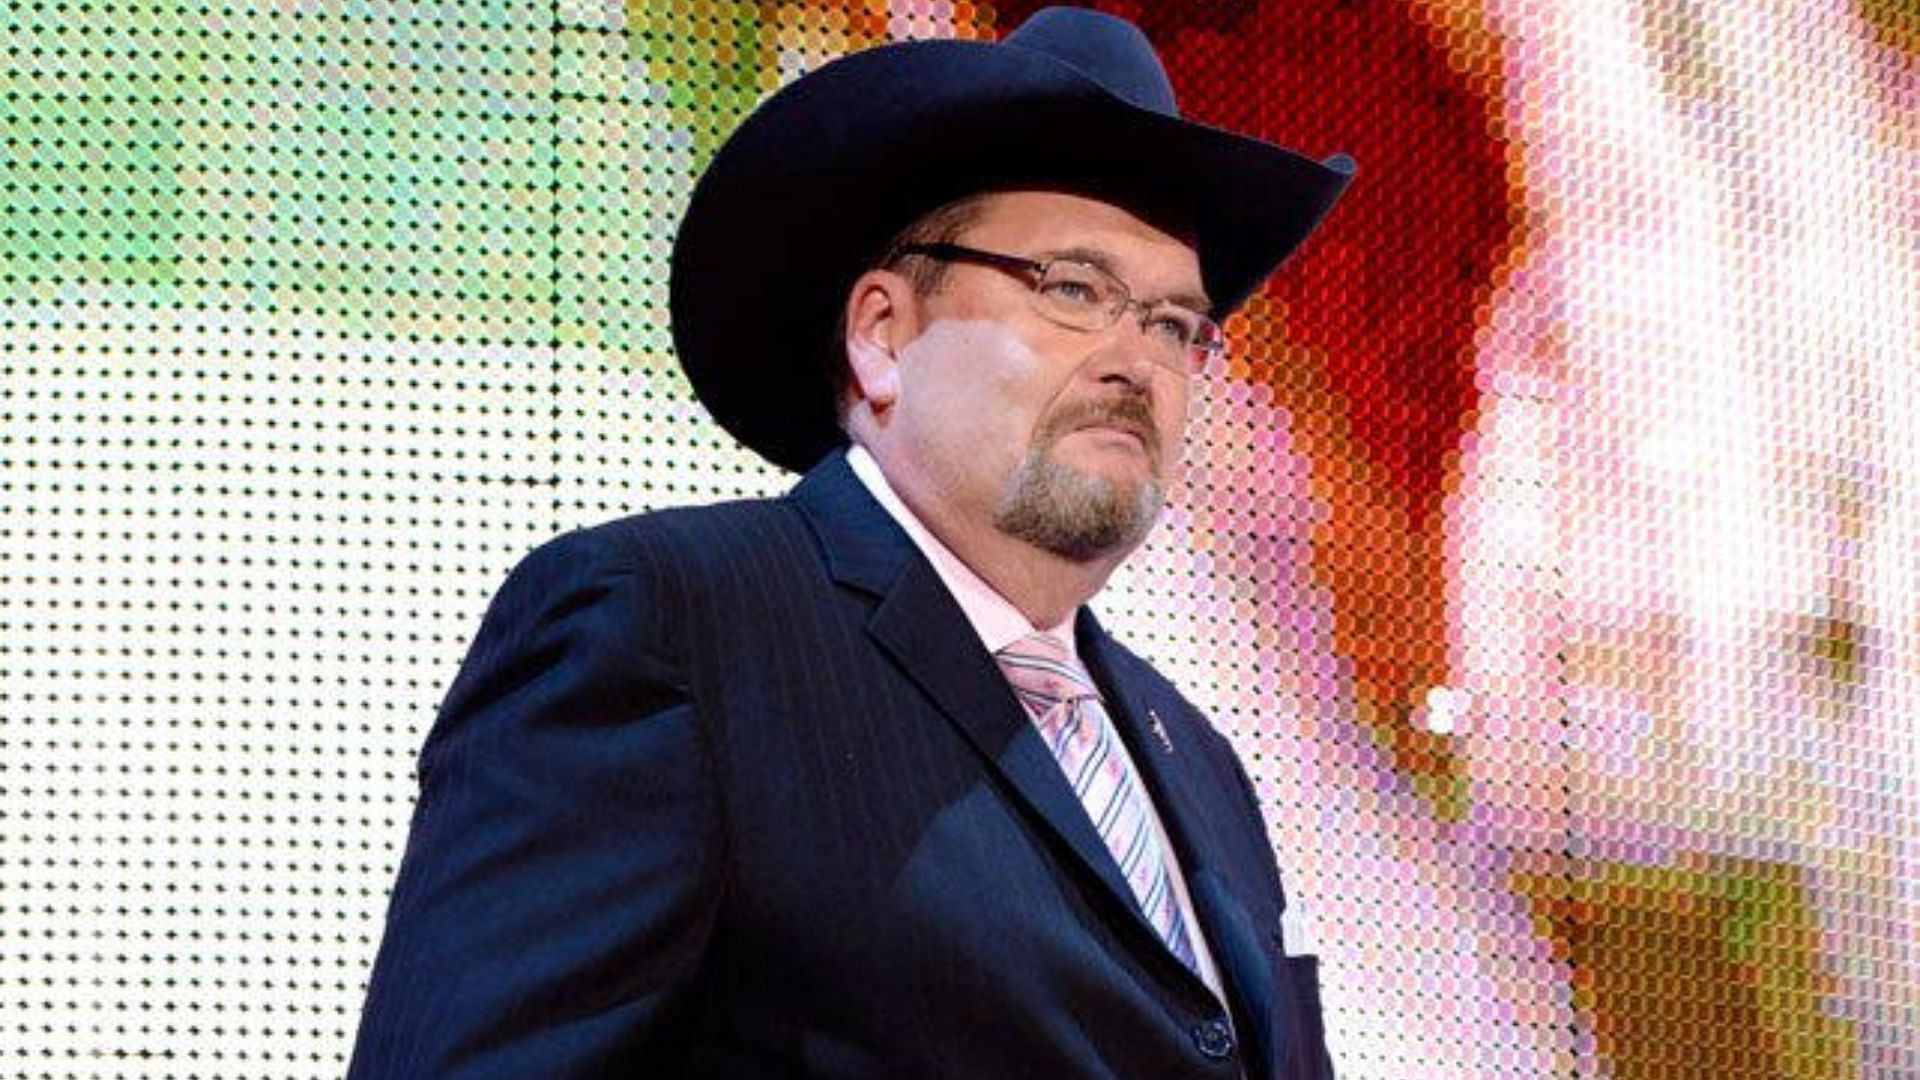 Jim Ross left WWE in 2019 to join AEW